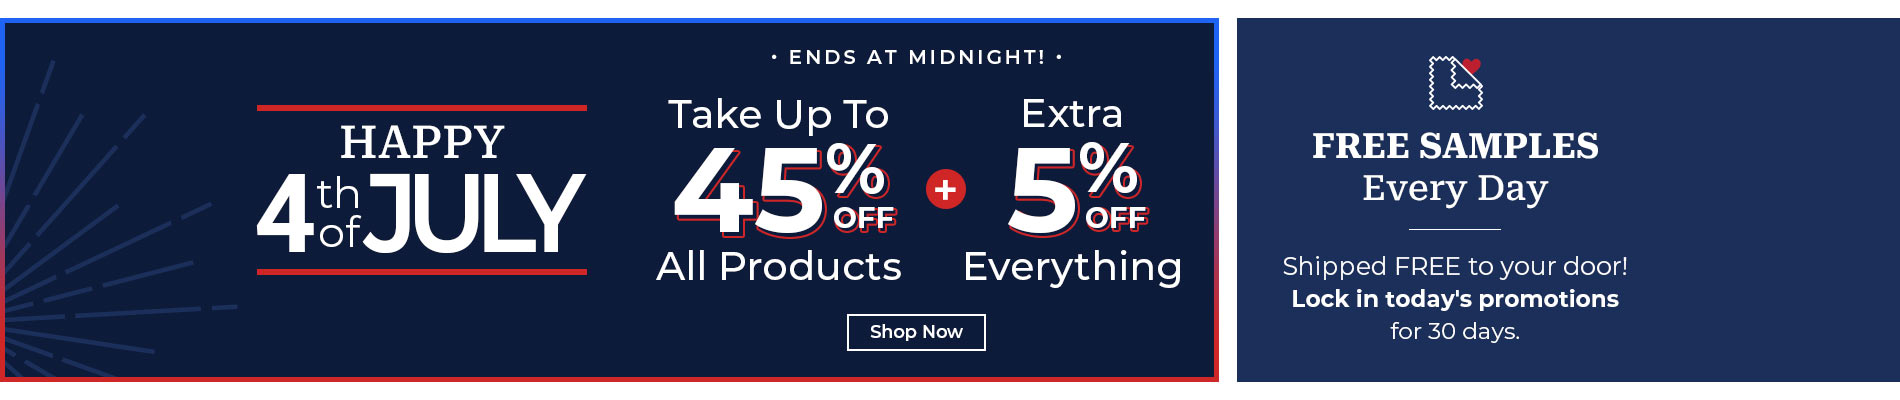 Take Up To 45% Off + Extra 5% Off Everything!